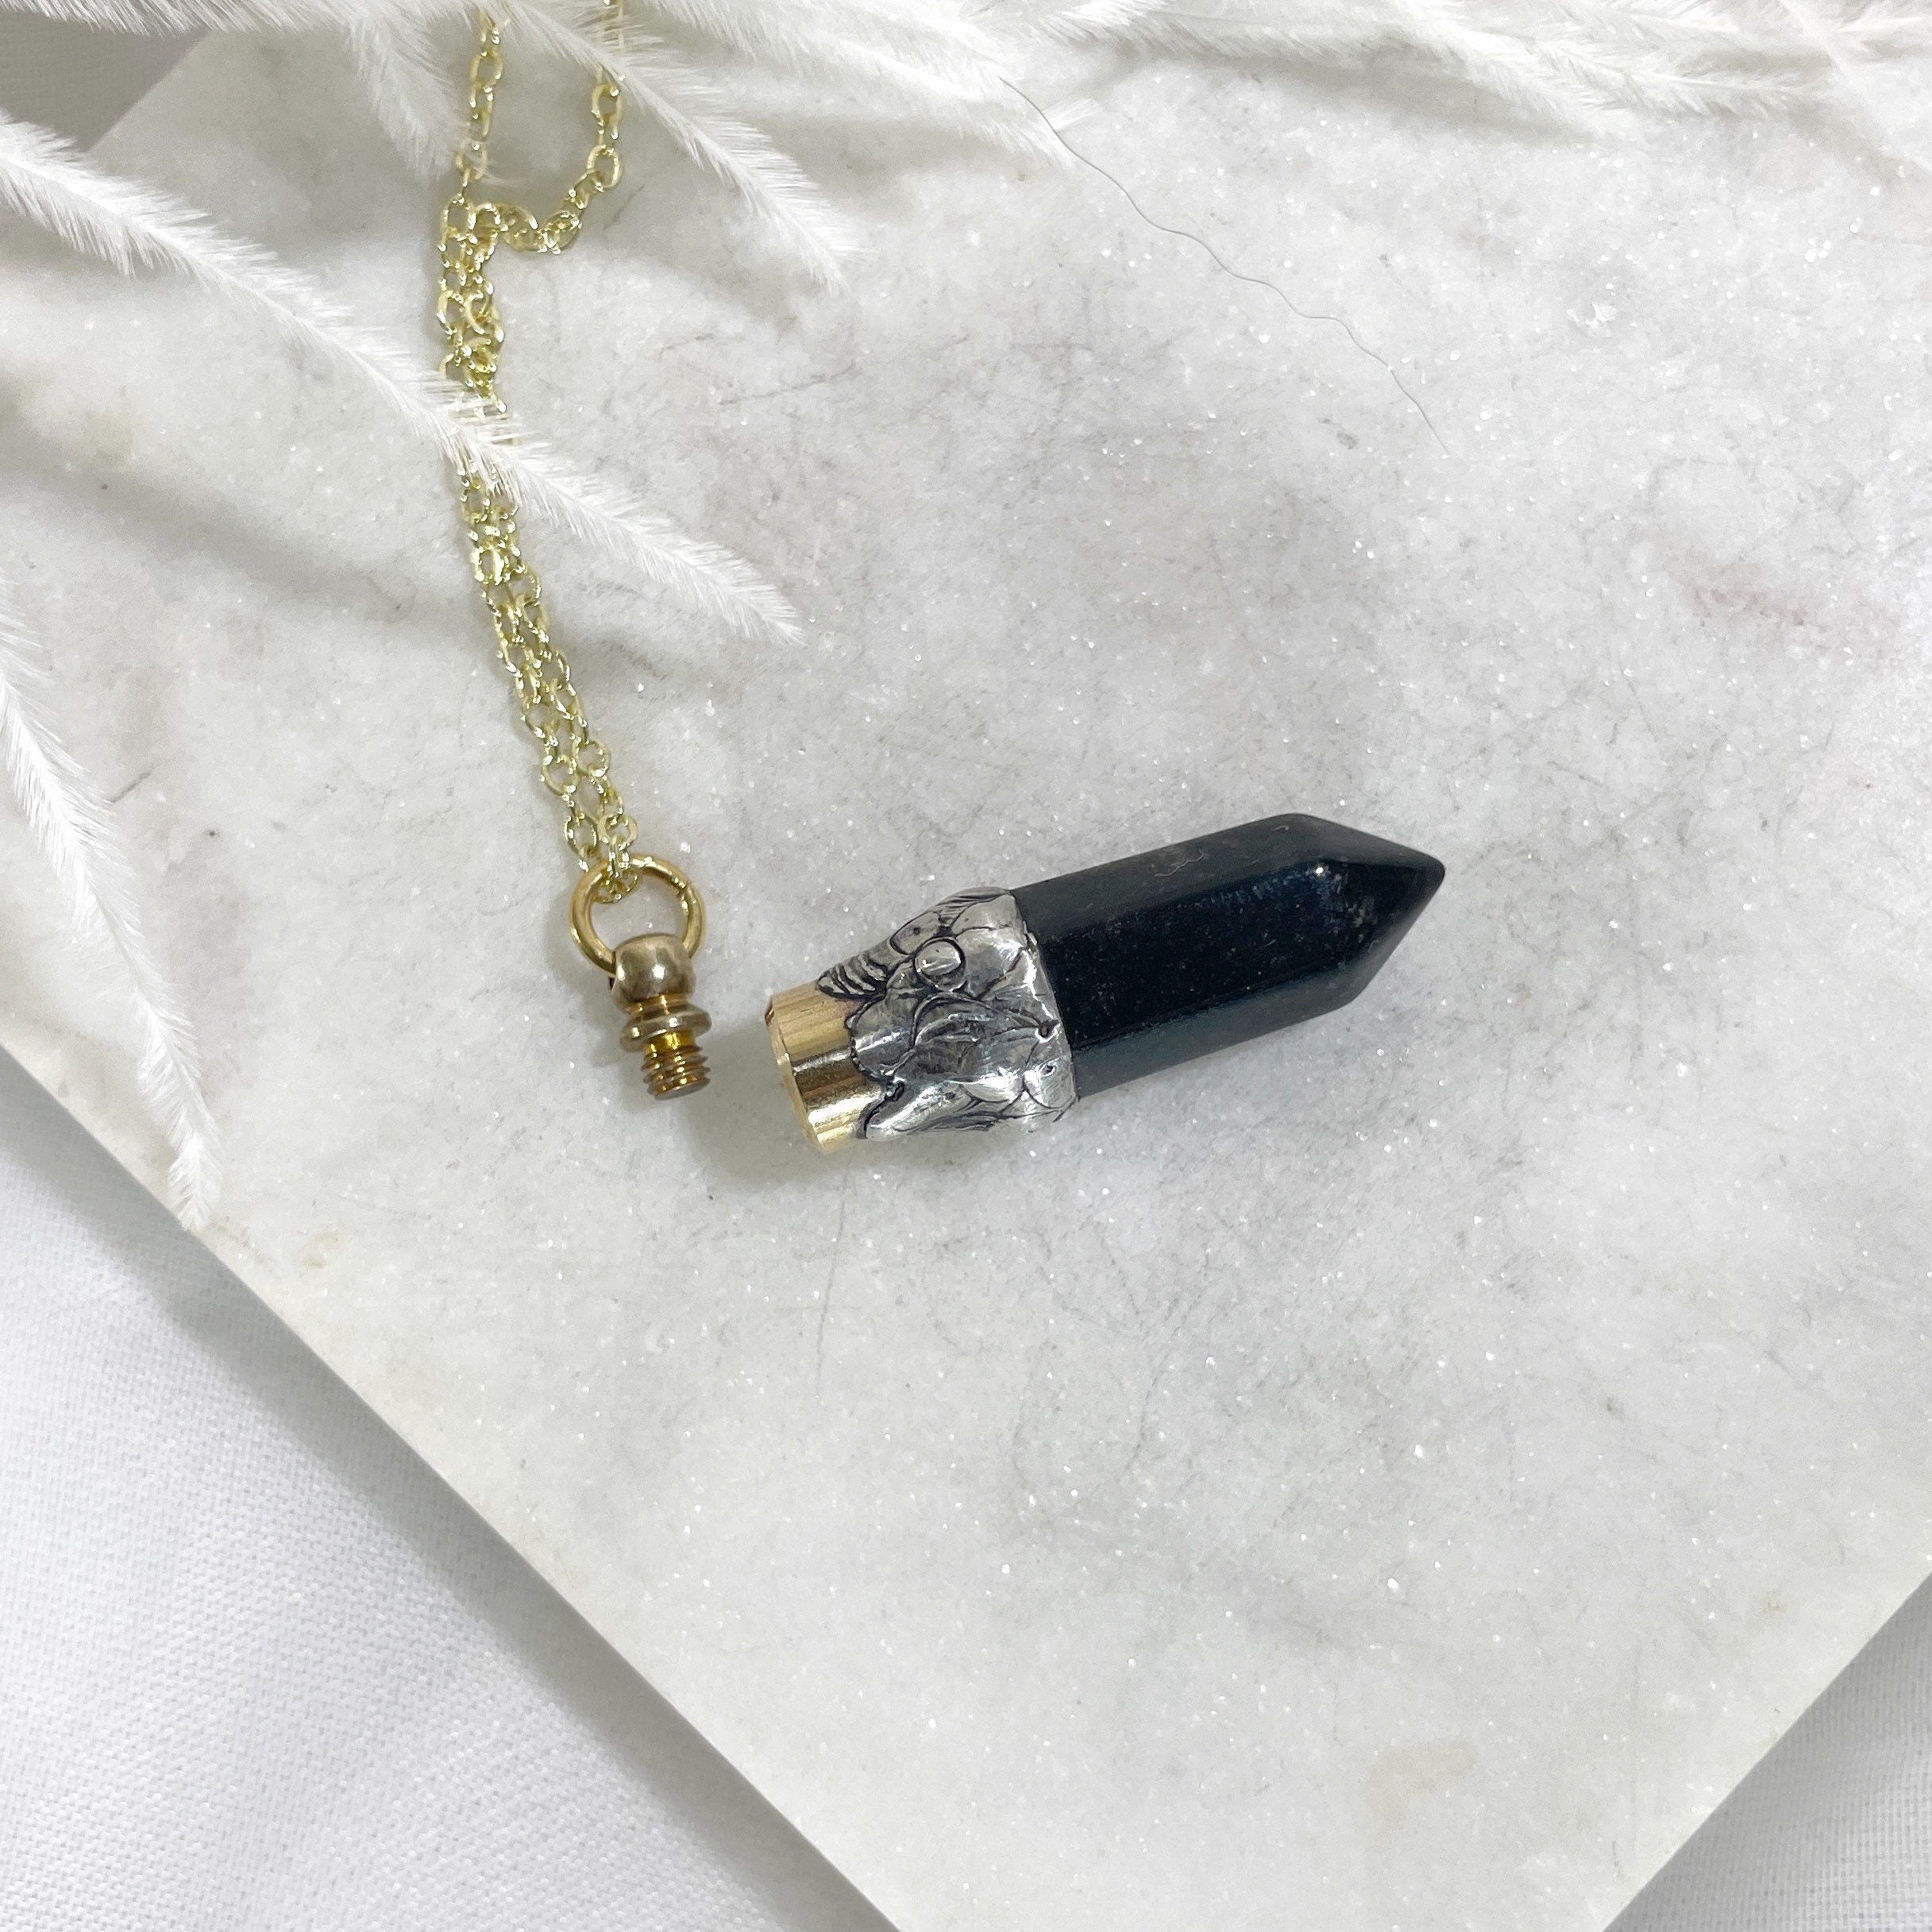 Buy Black Tourmaline Necklace. Black Tourmaline Floating Necklace.  Lightweight Natural Silk. Birthstone Gifts. Incl a Gift Box & Crystal Card.  Online in India - Etsy